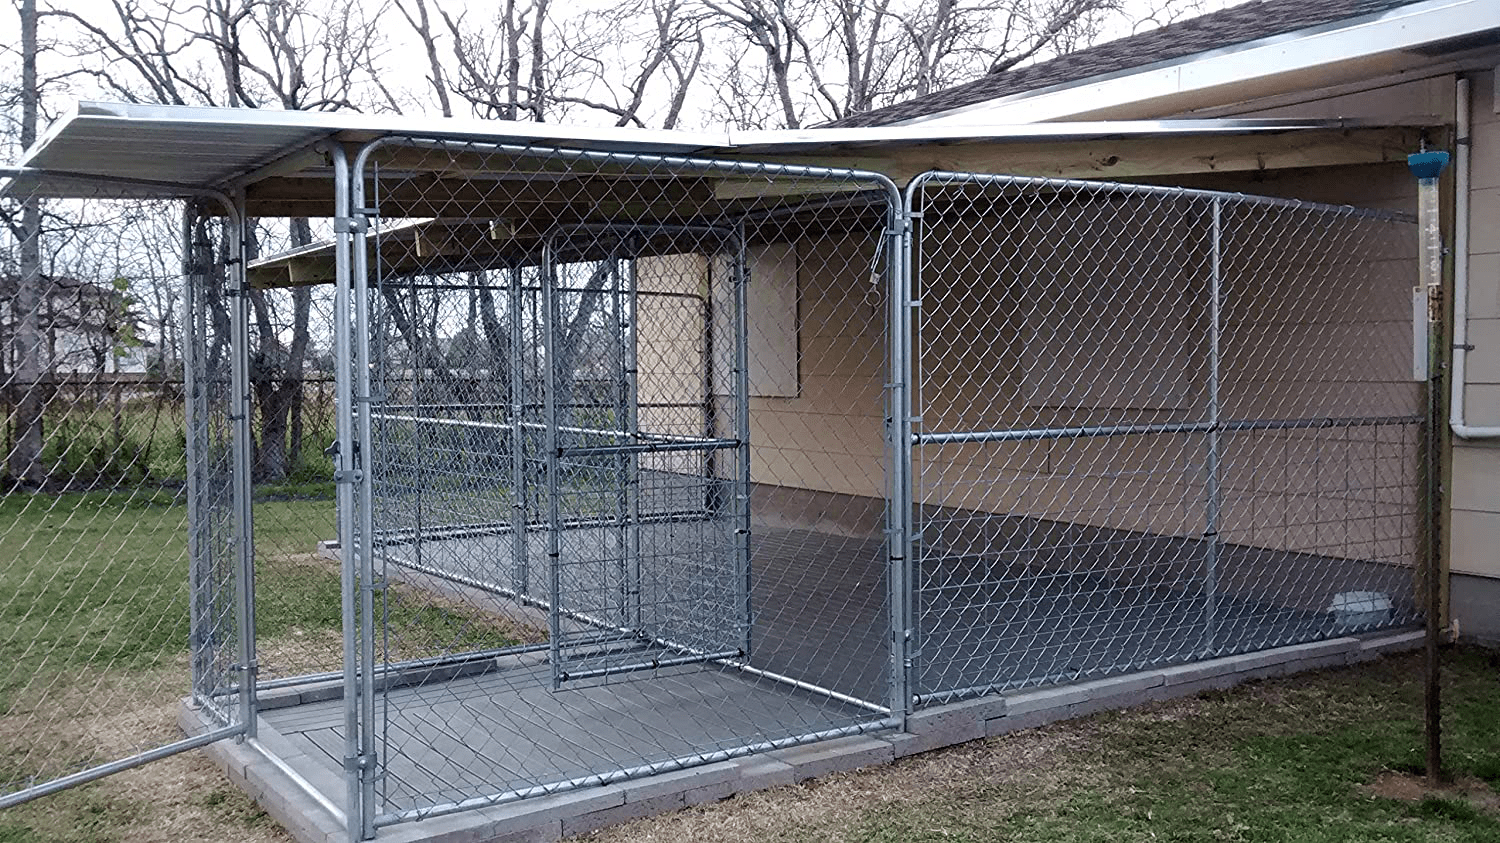 13 Kennel Decks for a 10Ft X 10Ft Kennel